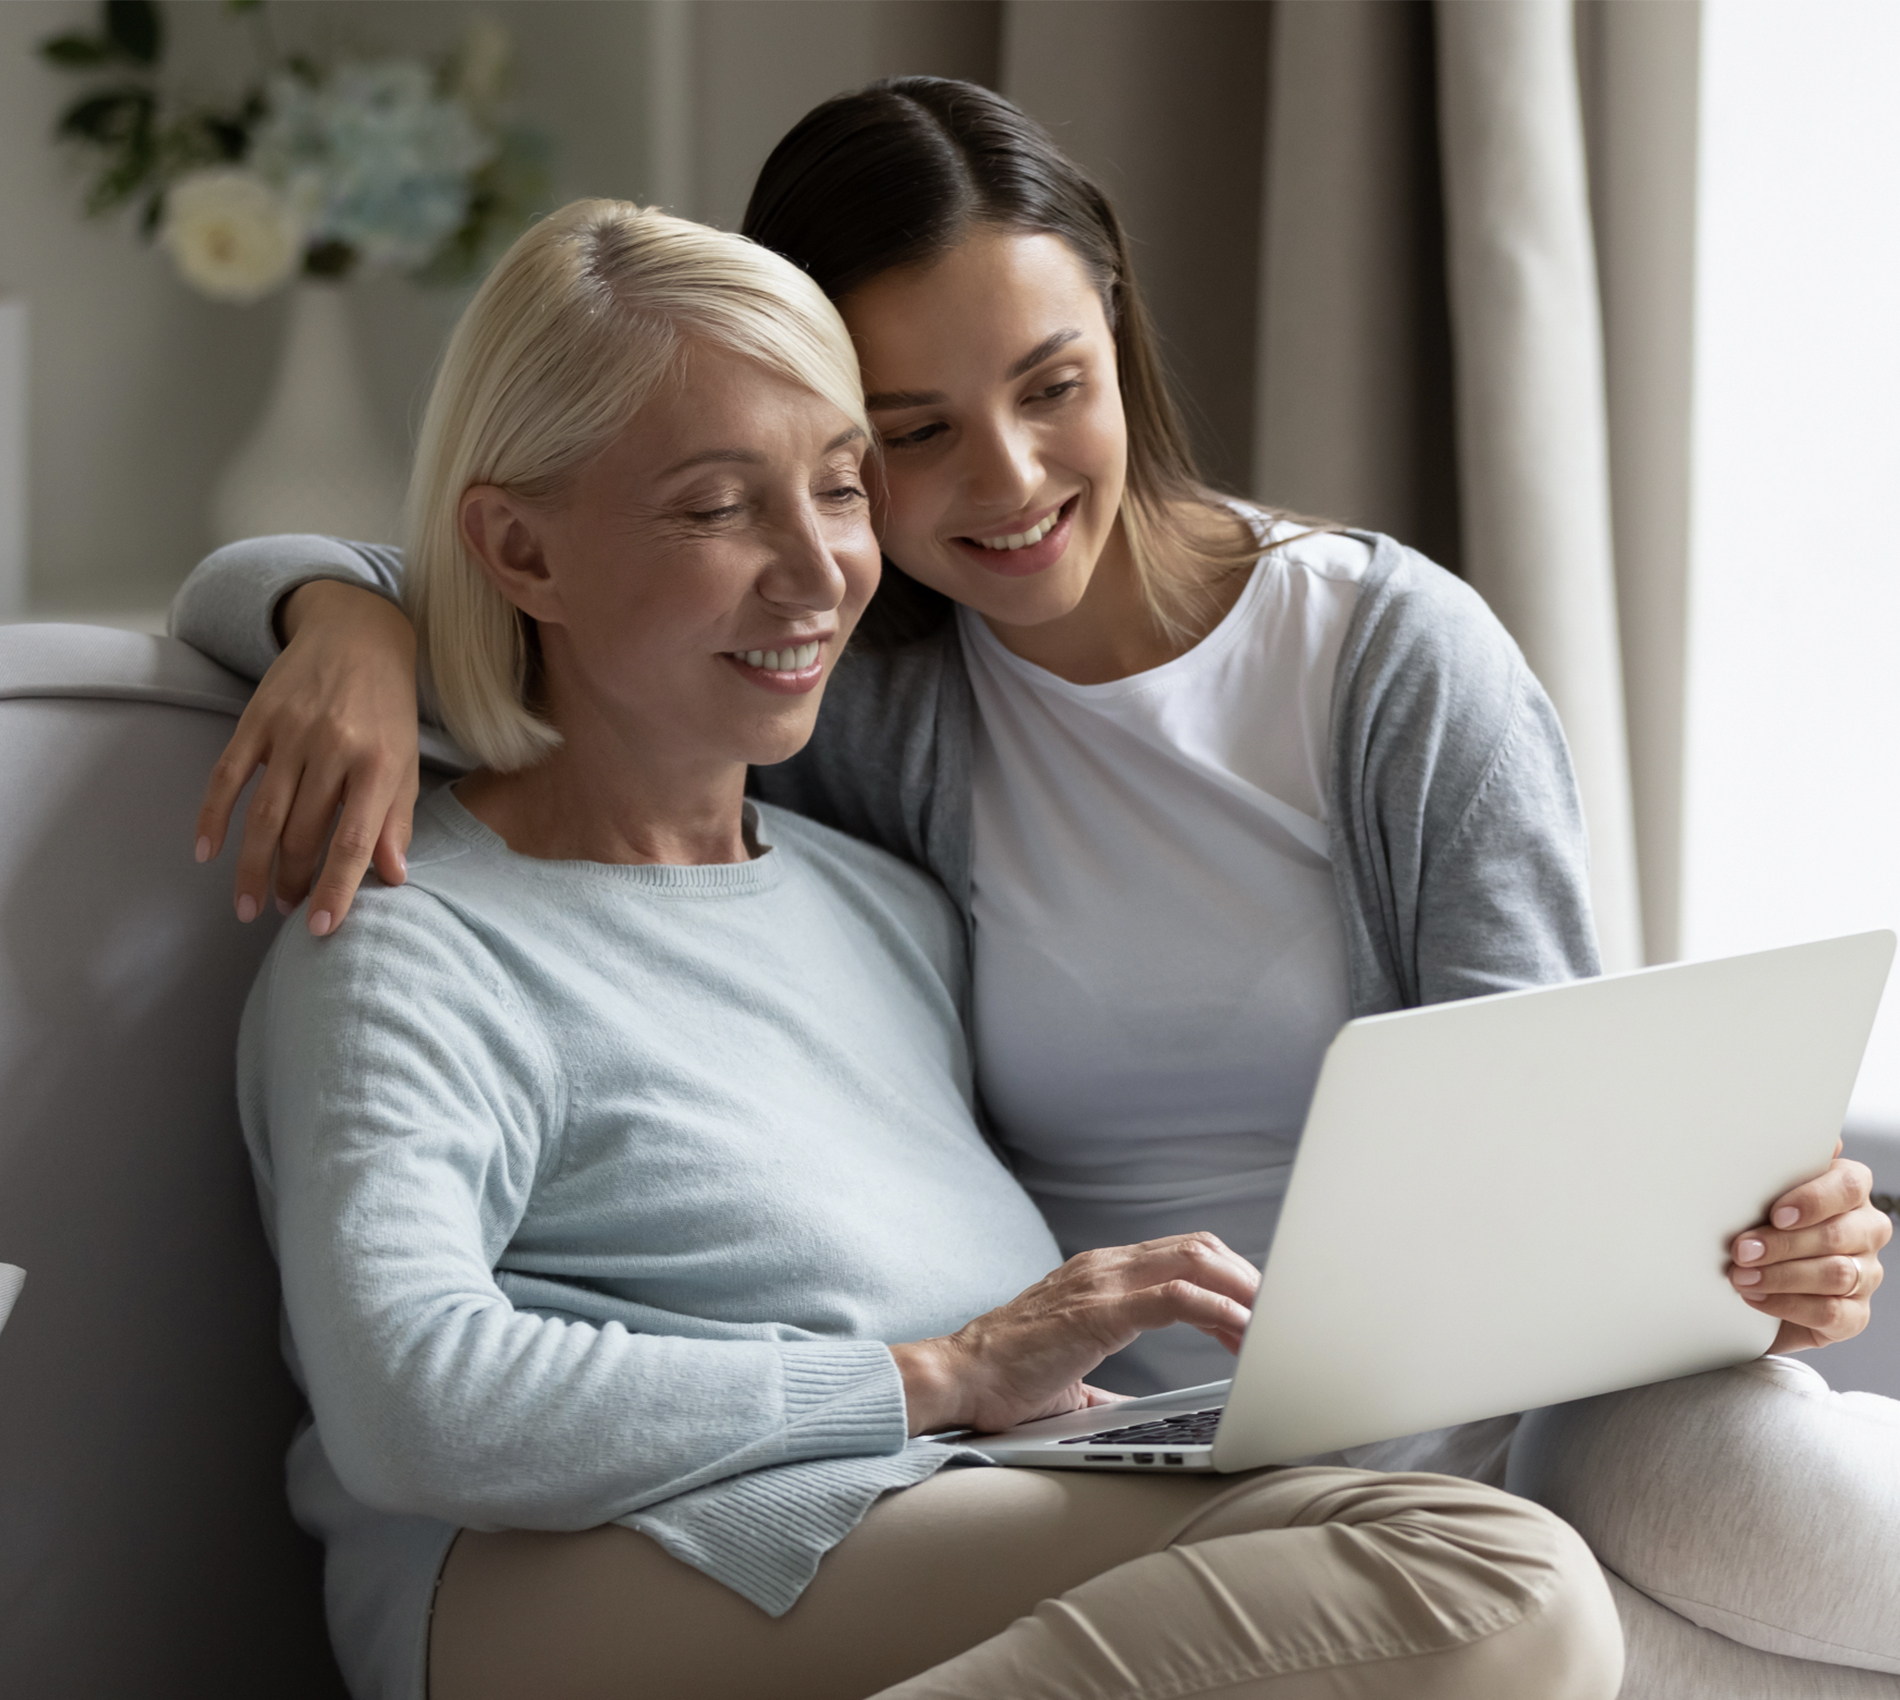 Mother’s Day 2021 in Brazil: one of the most important days for Brazilian ecommerce